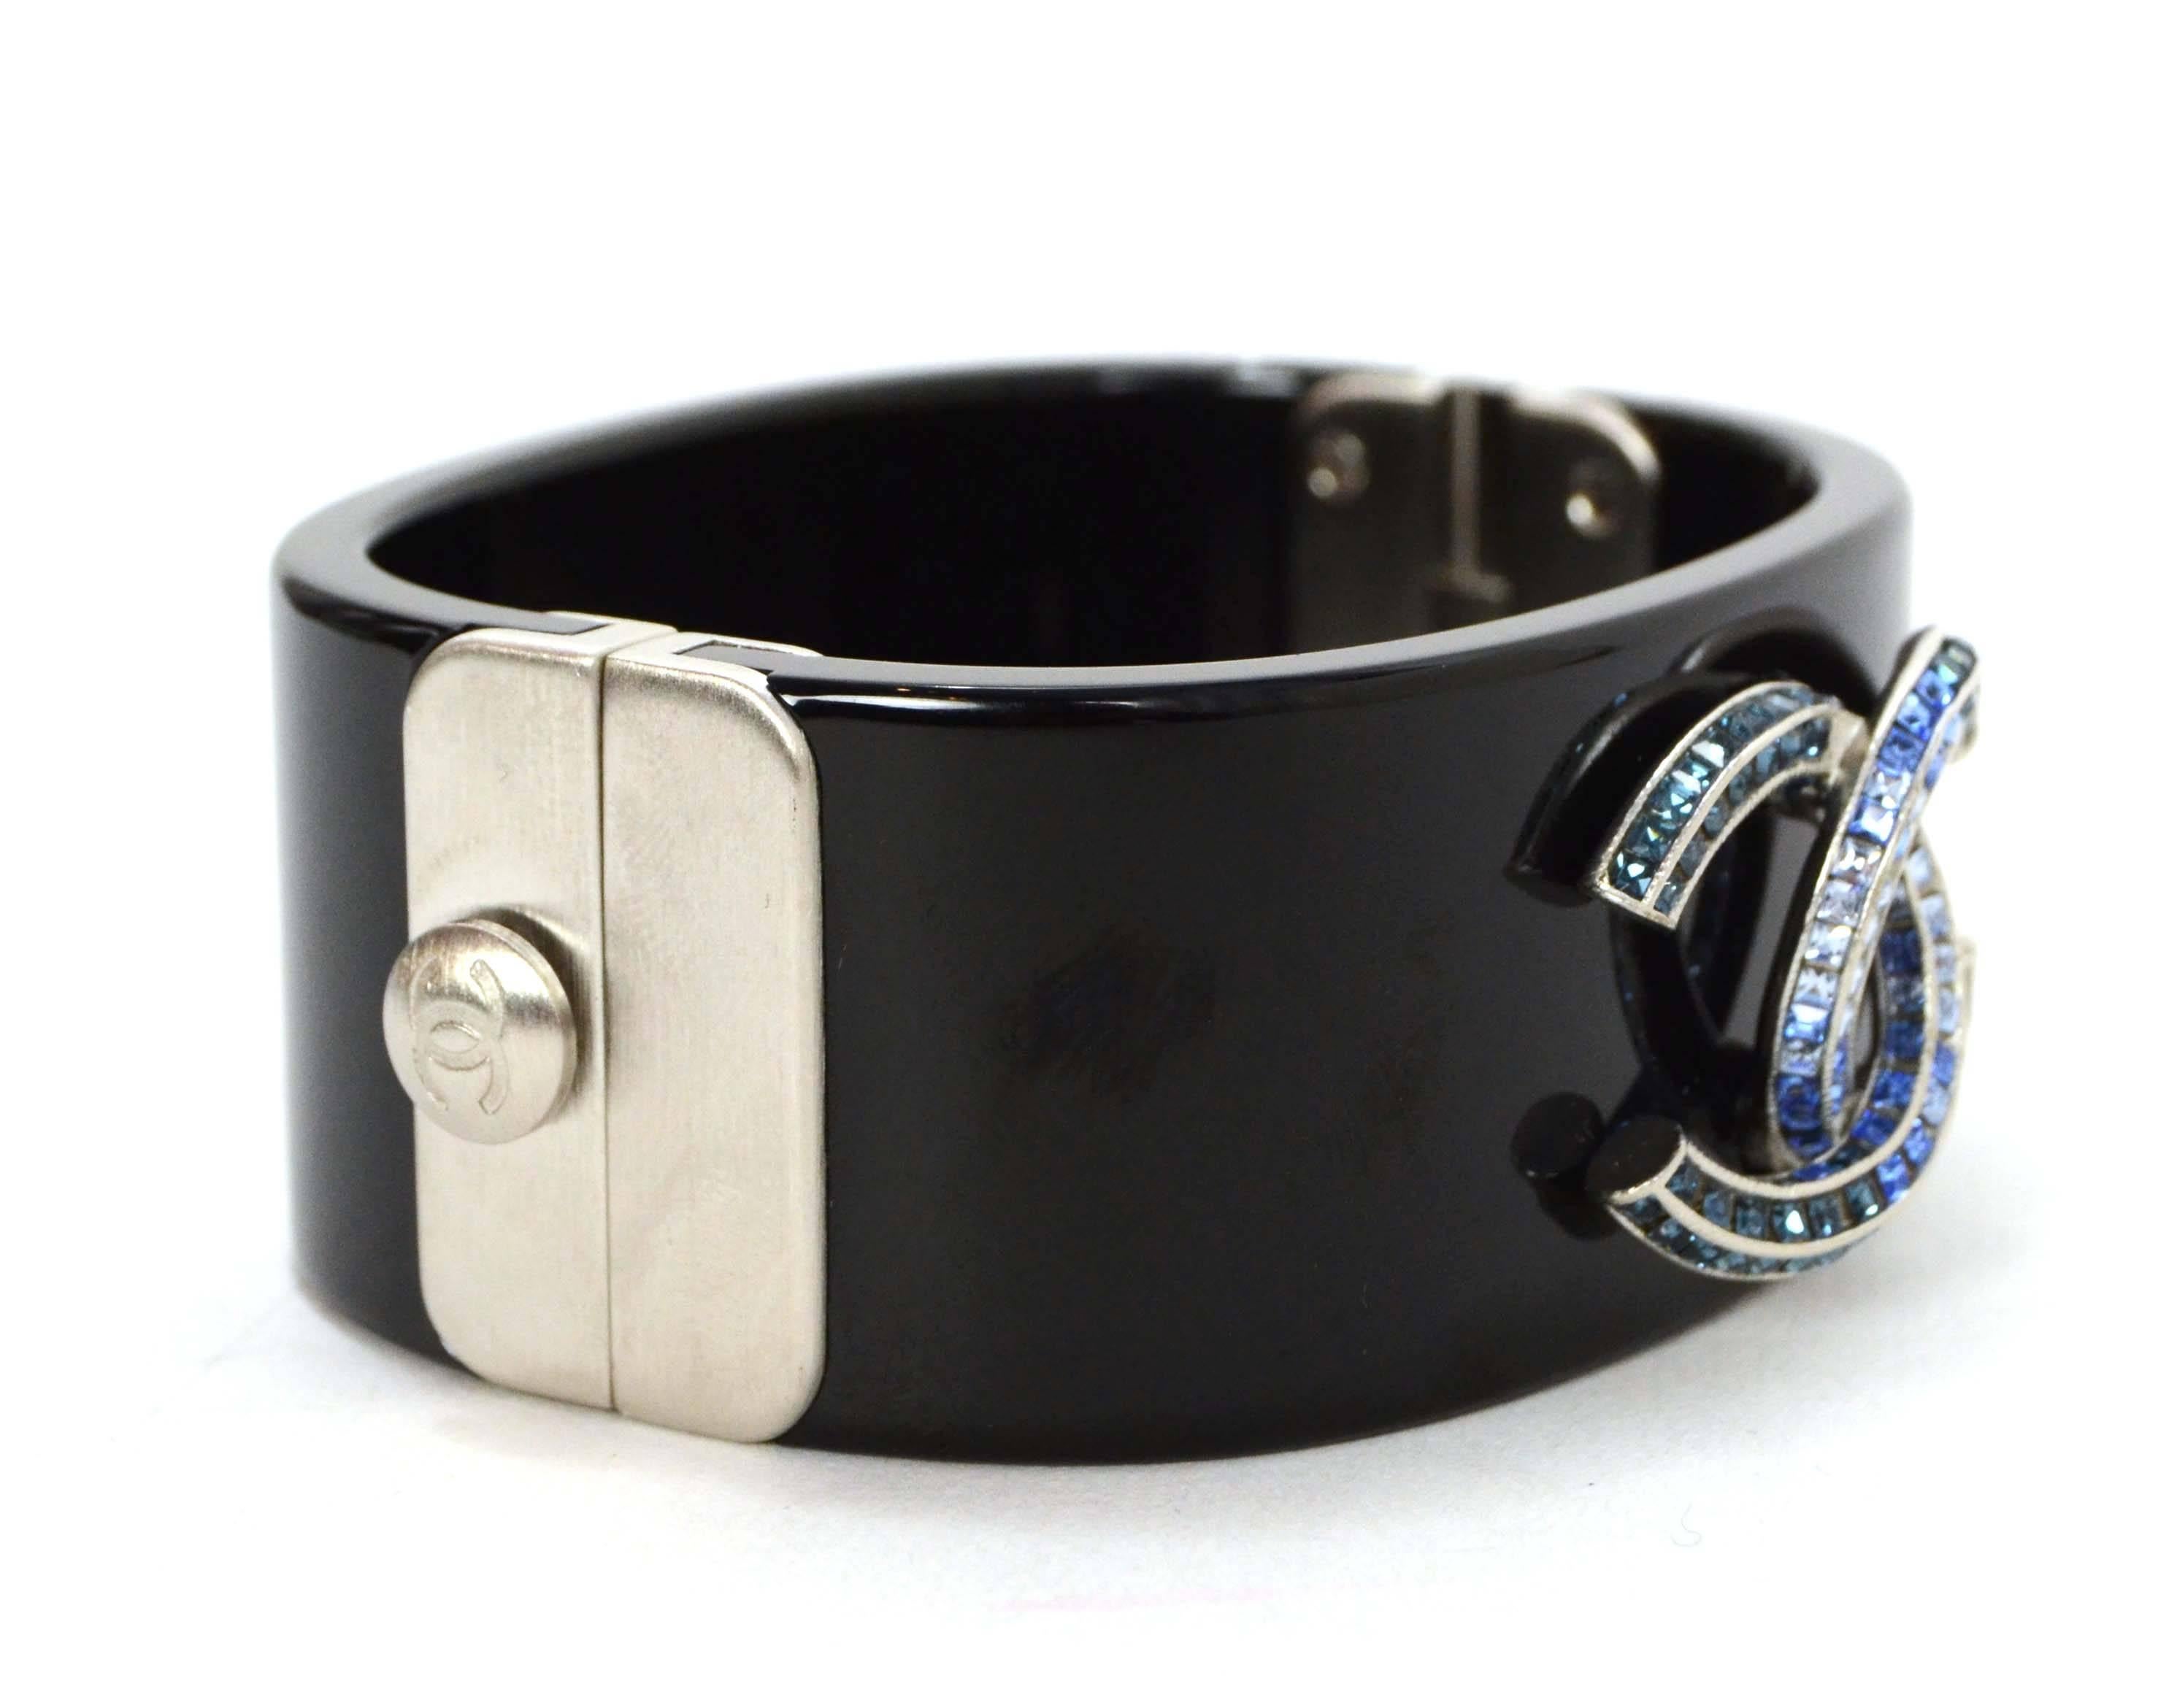 Chanel ‘15 Black Resin & Blue Crystal CC Cuff Bracelet
Features light and dark blue crystals in silvertone CC pendant
Made In: France
Year of Production: 2015
Color: Black, blue and silvertone
Materials: Resin, metal and crystals
Closure: